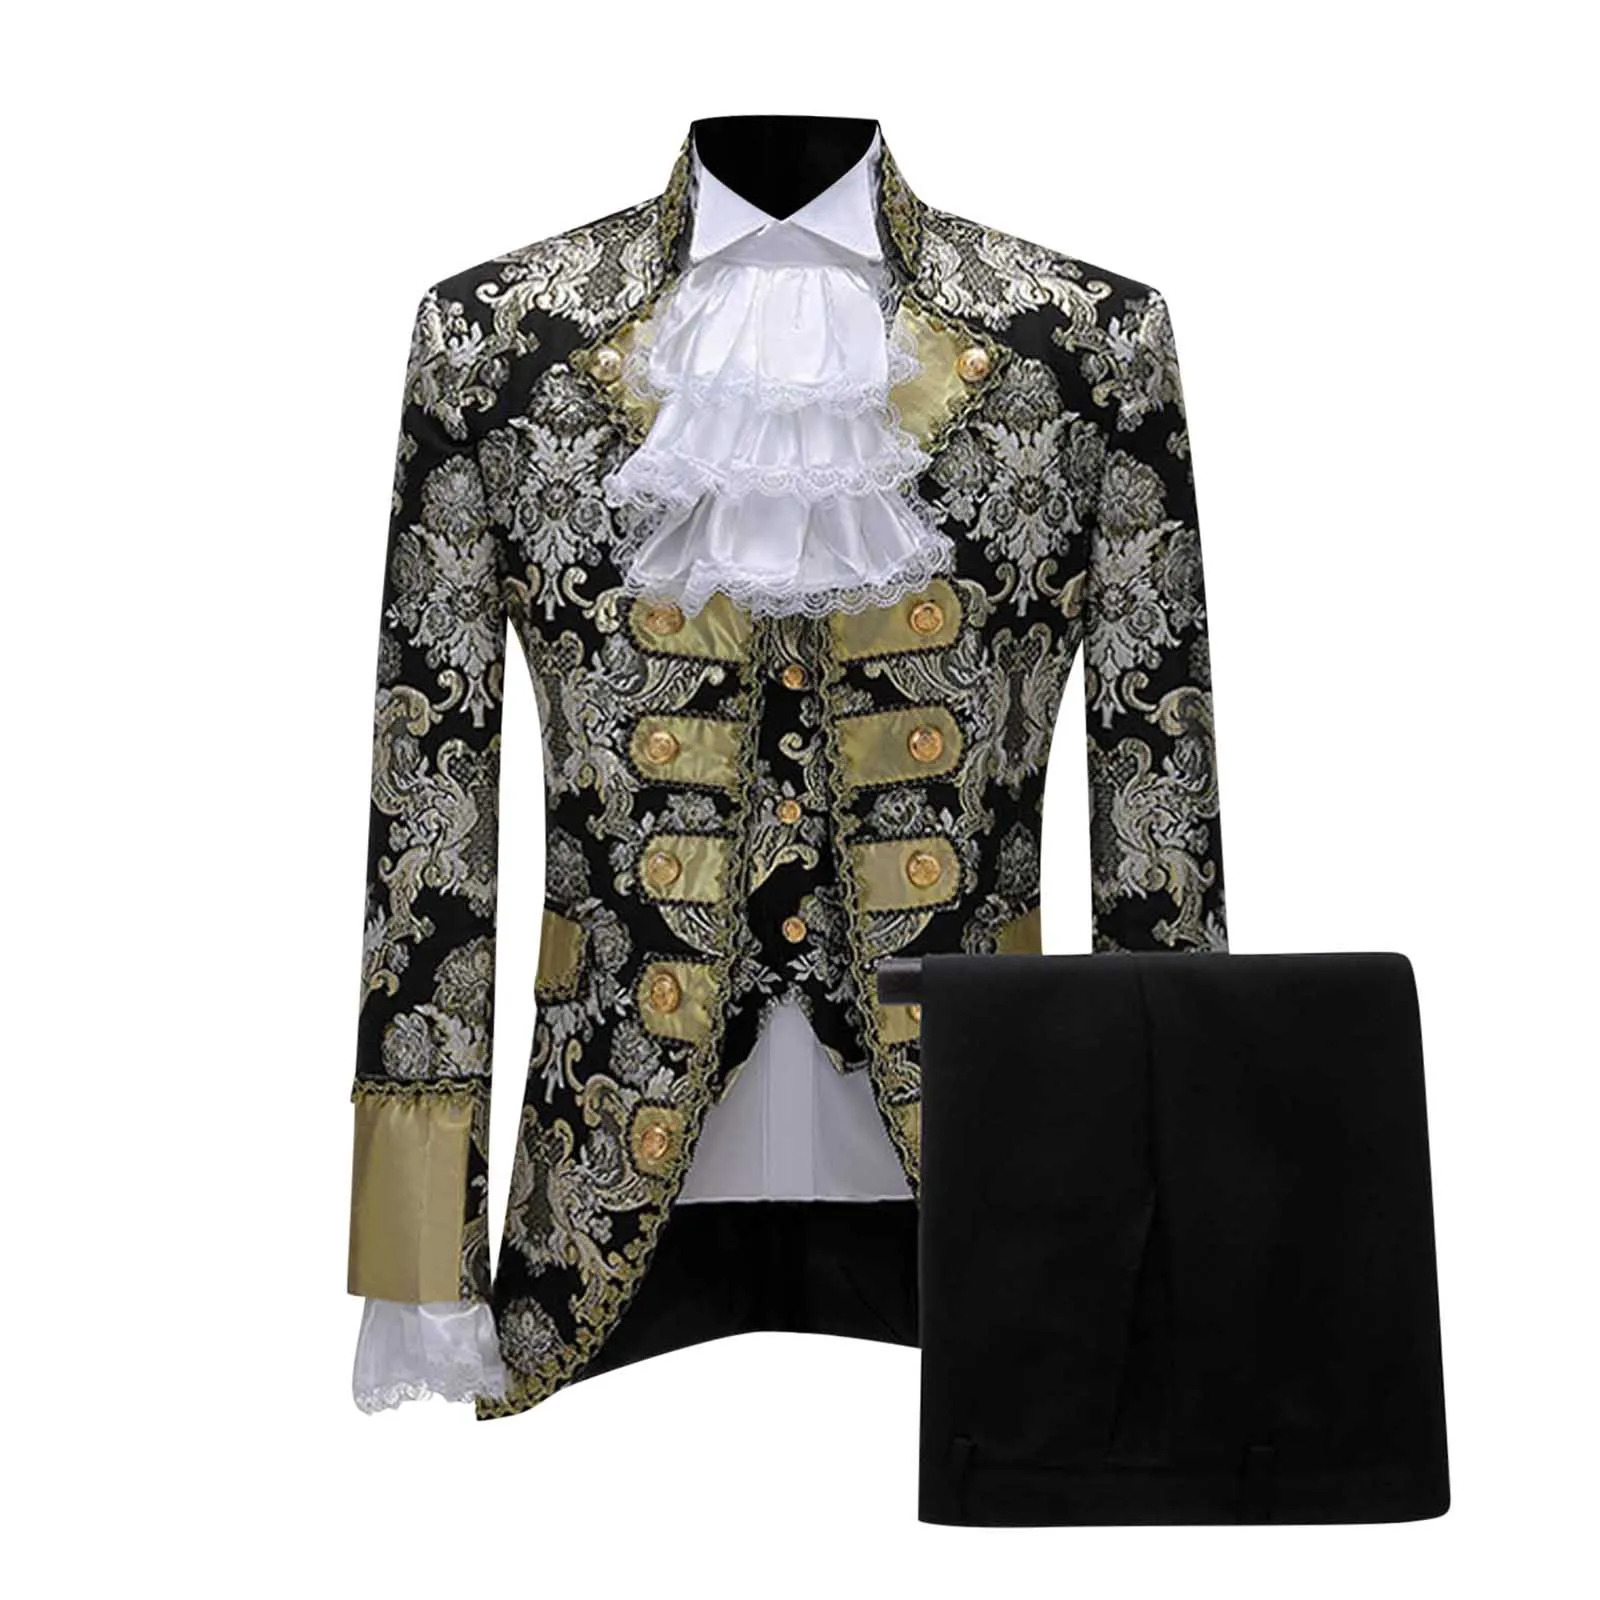 

Mens European Gothic Style Men's Sets 2020 popular new Court Costumes Uniforms Beautifully Embroidered Men Performances Coat